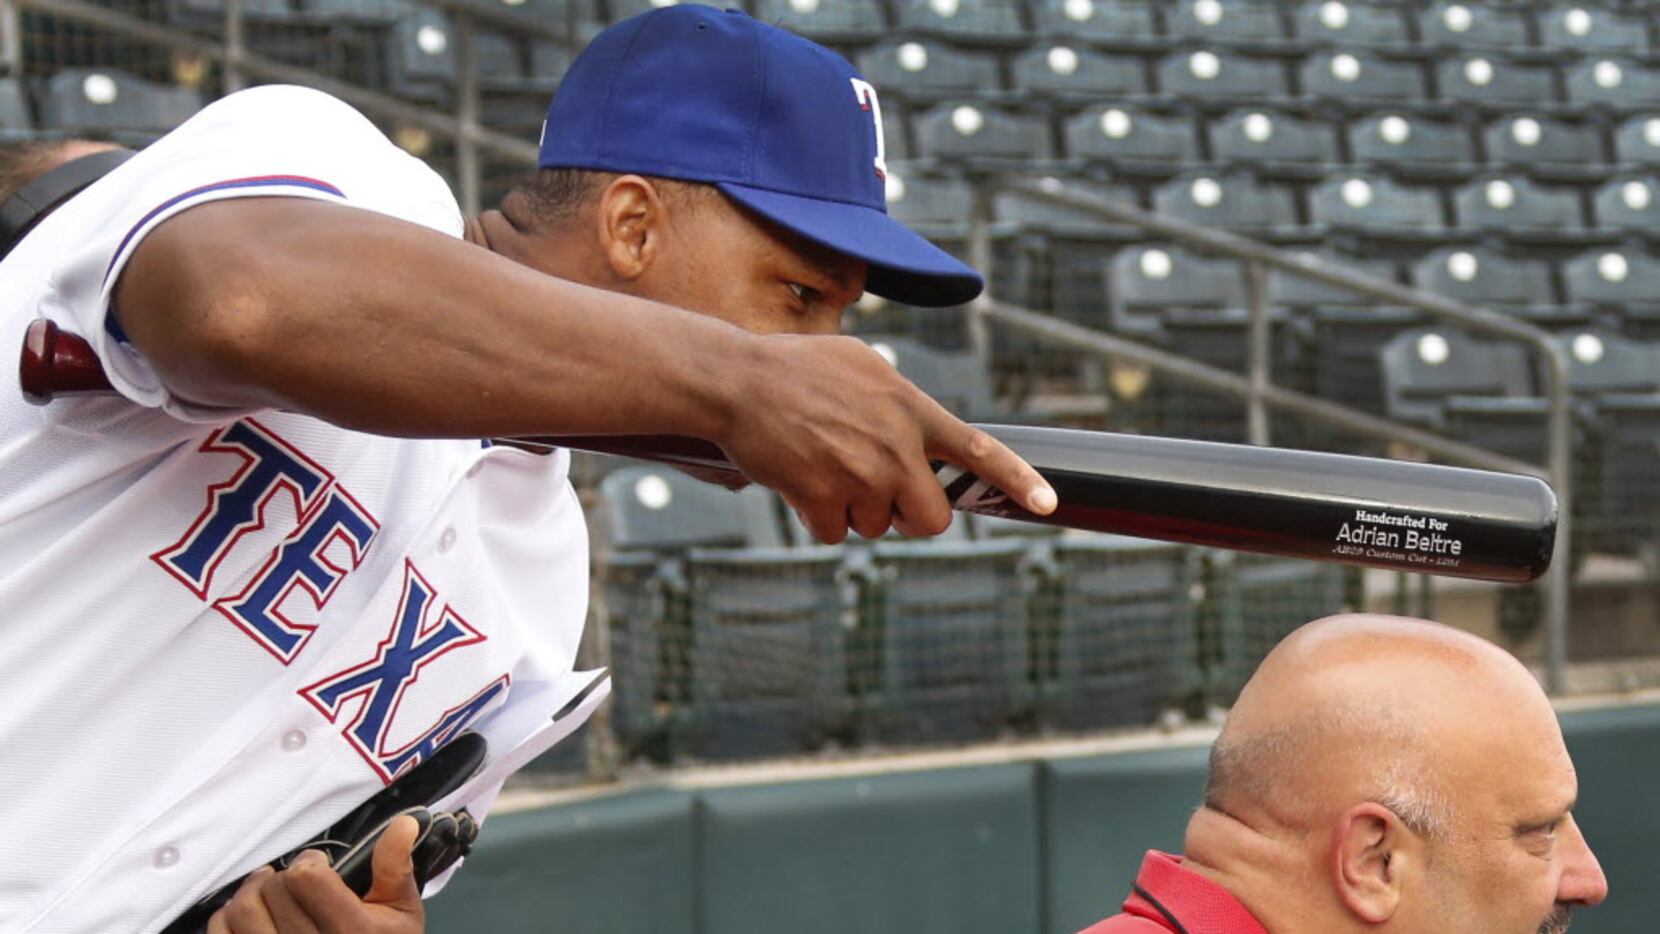 Flashback: It has been a pleasure to cover Texas Rangers third